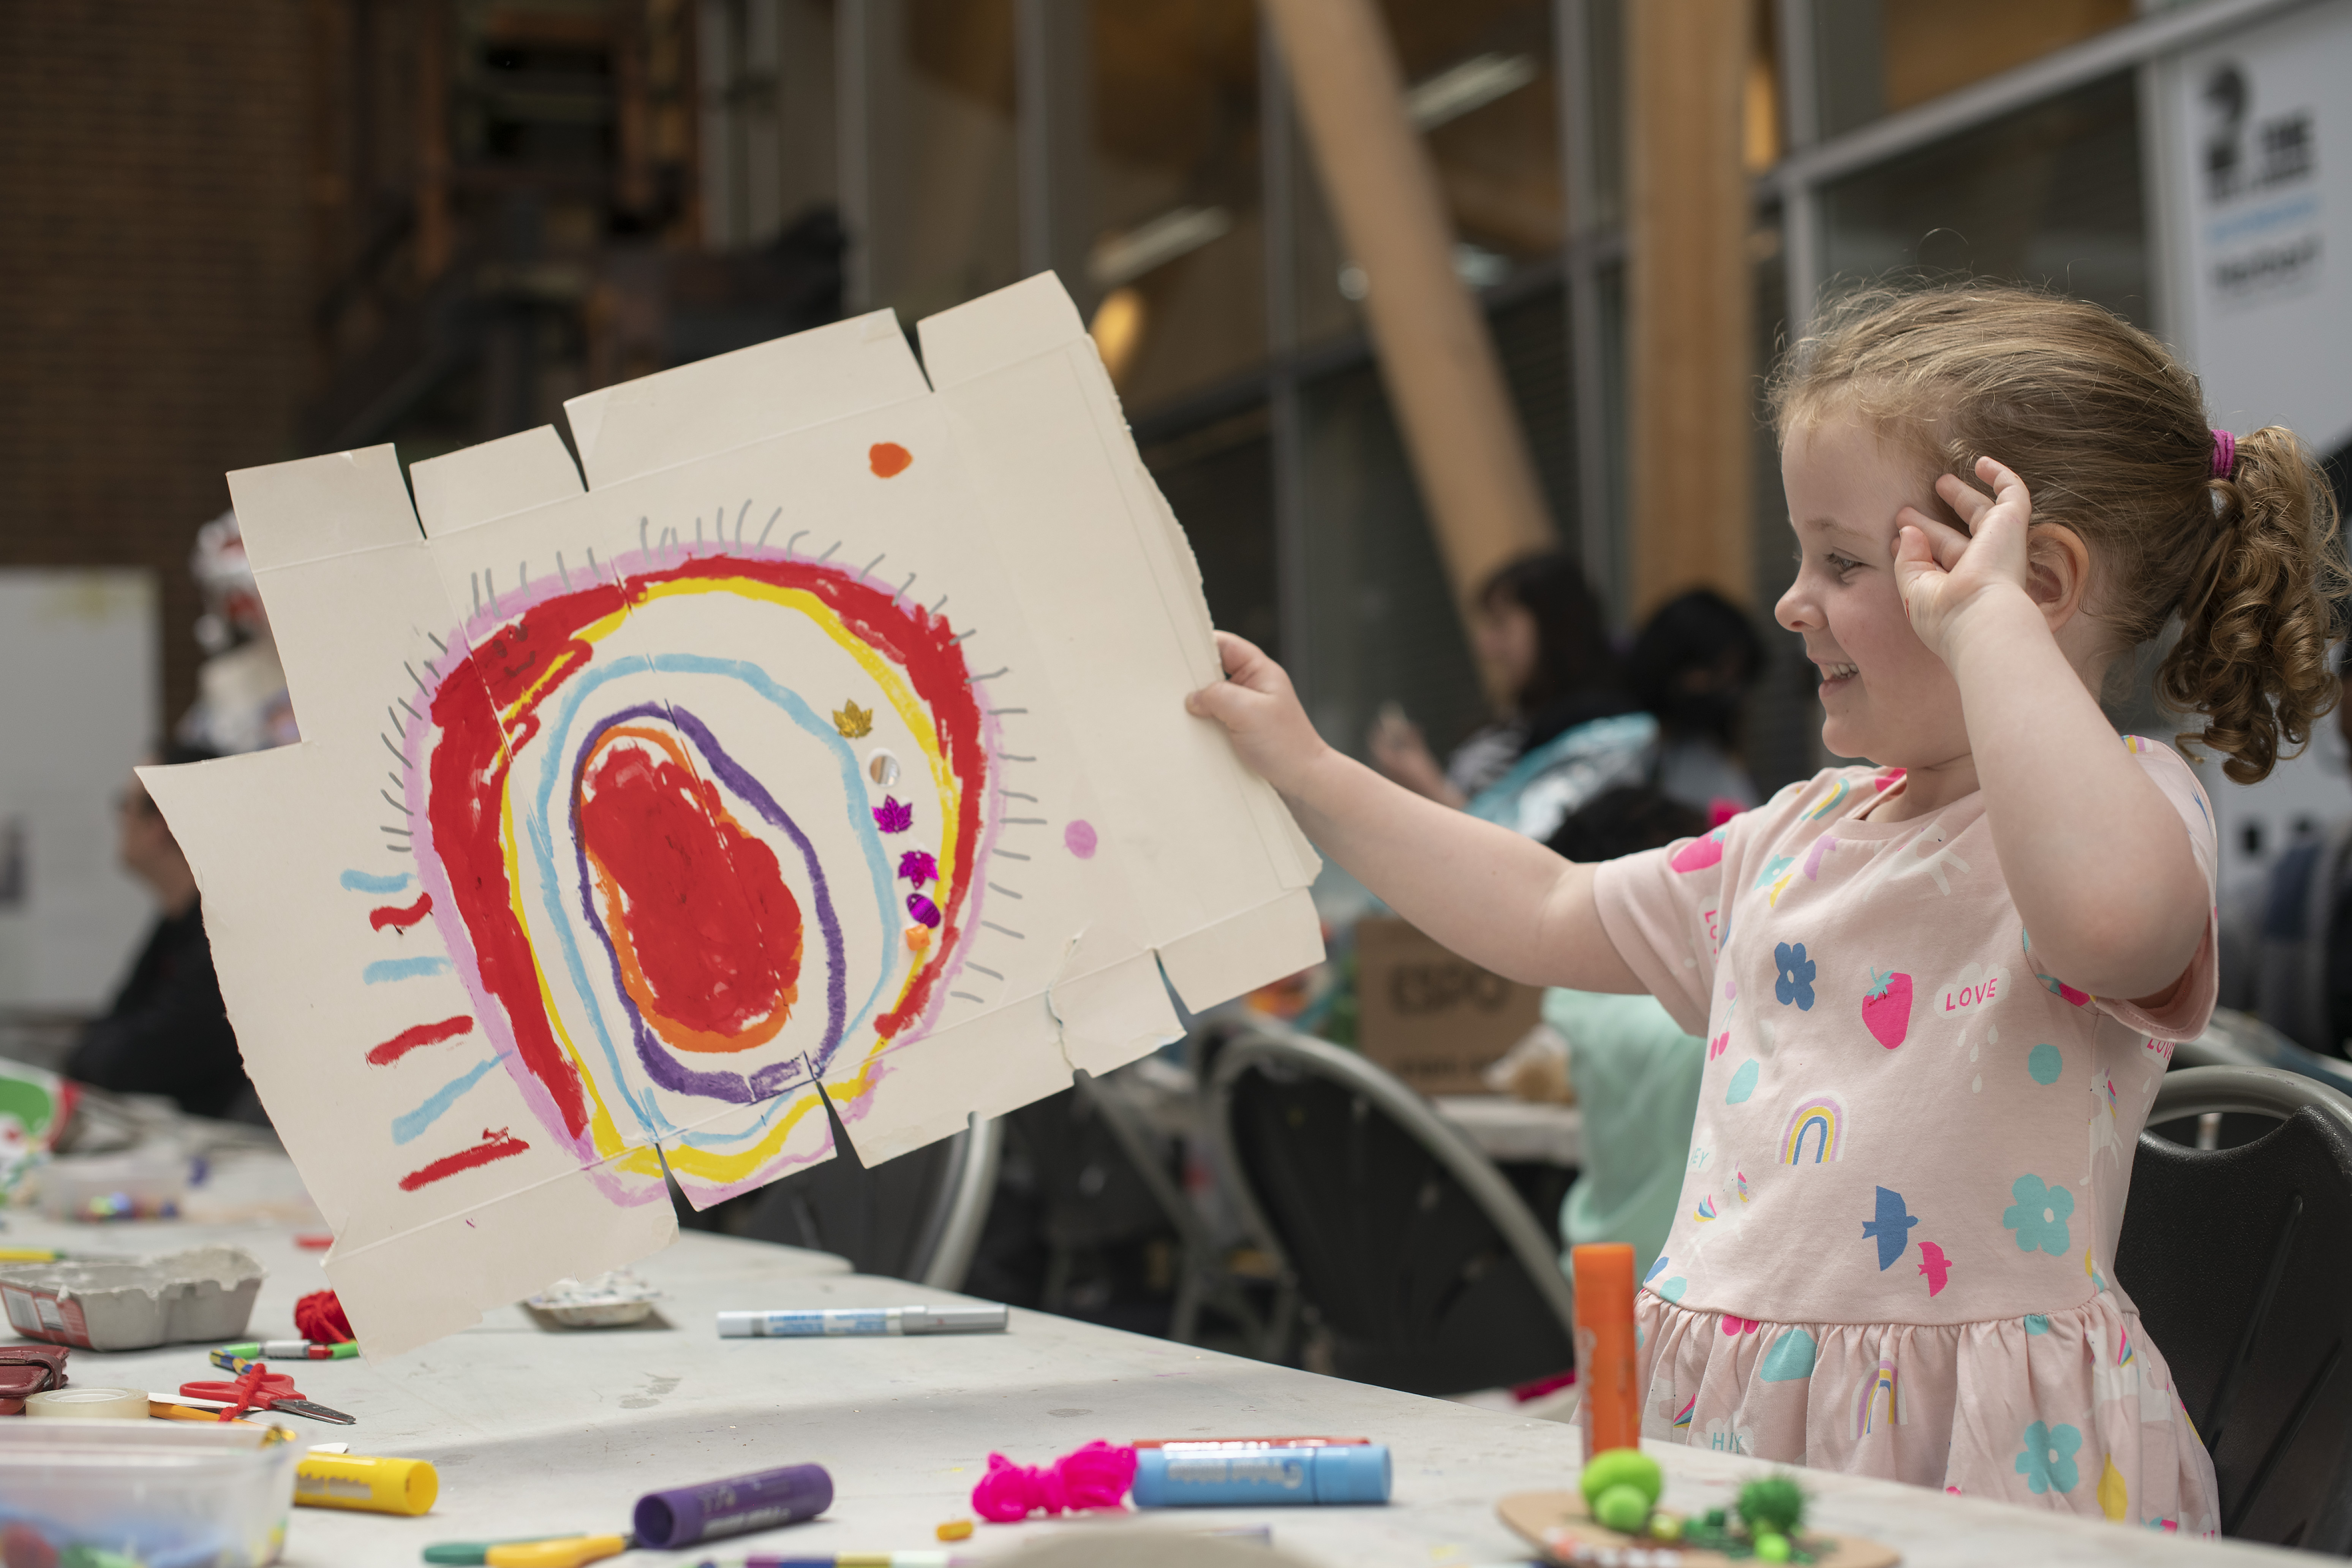 A girl holding up a brightly coloured, abstract drawing she has made on a piece of card